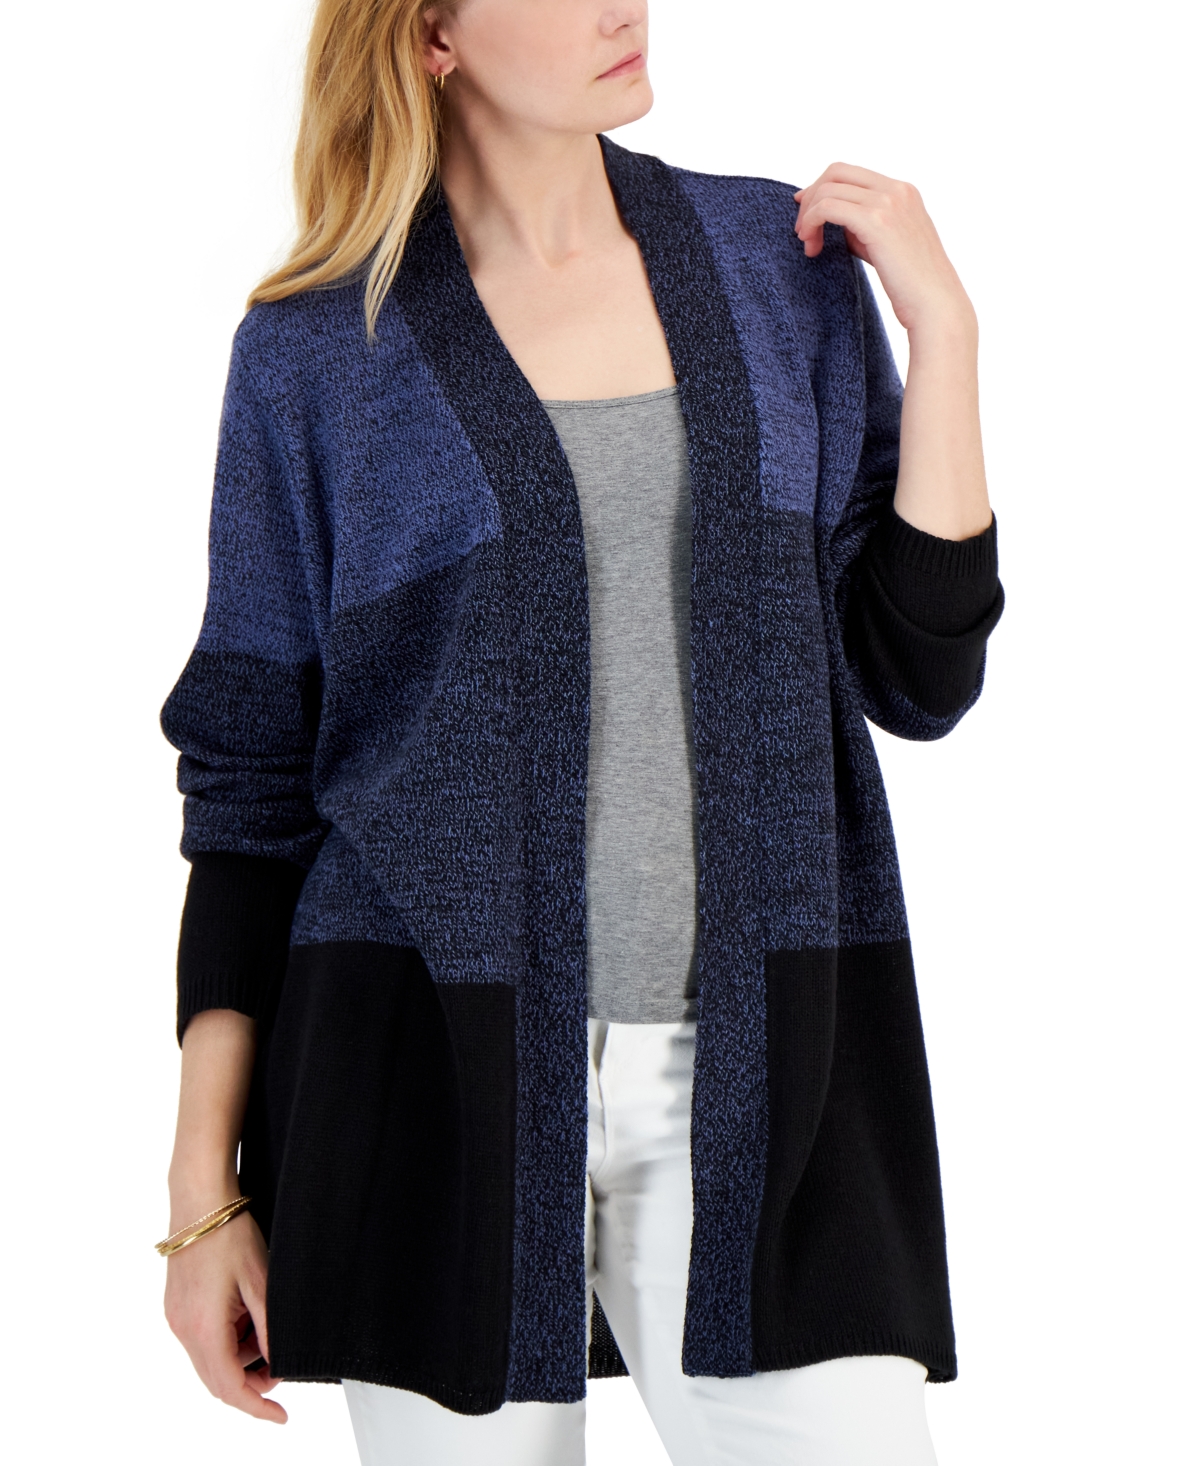 Women's Turbo Colorblocked Cardigan, Created for Macy's - Blue Combo